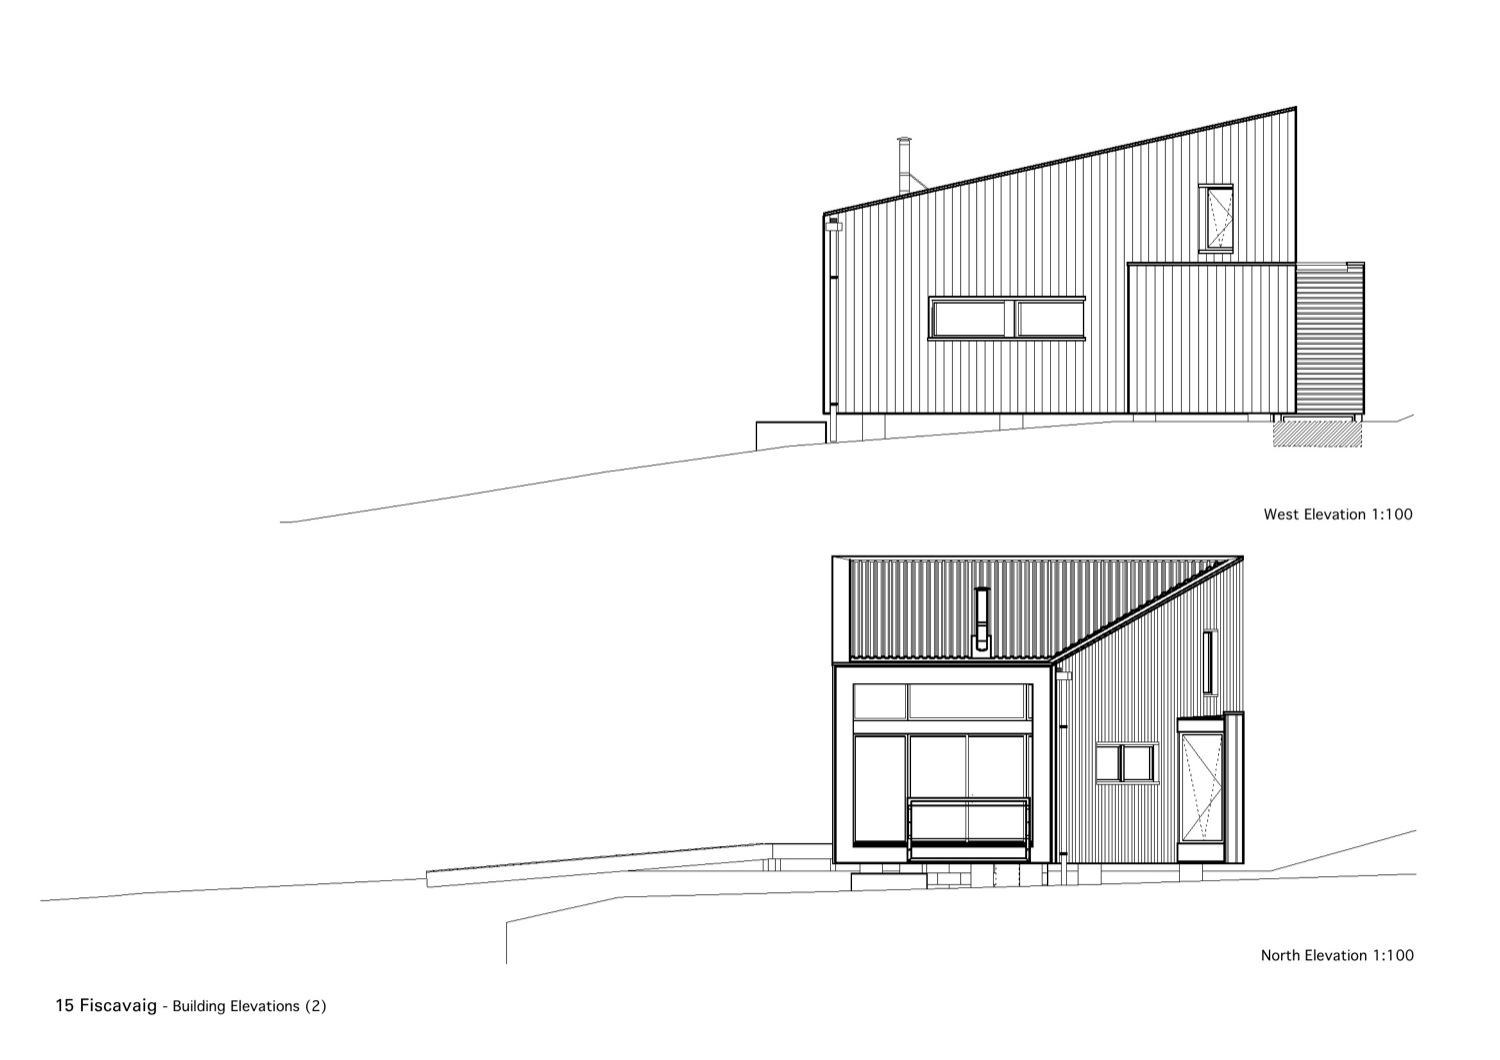 http://www.archdaily.com/wp-content/uploads/2009/11/1259262713-west-north-elevations.jpeg